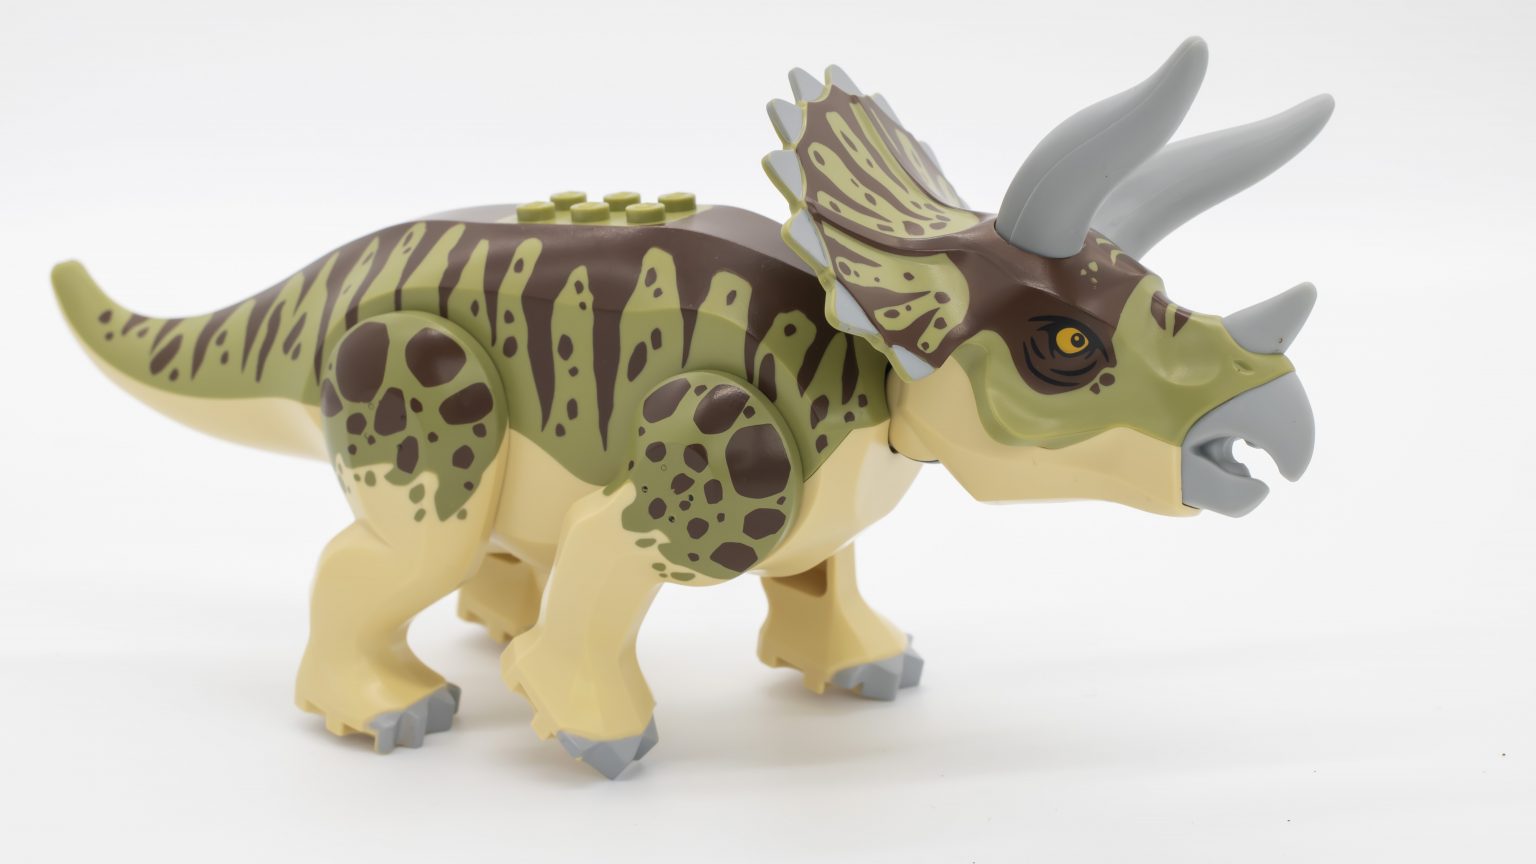 Lego Jurassic World 75937 Triceratops Rampage Review